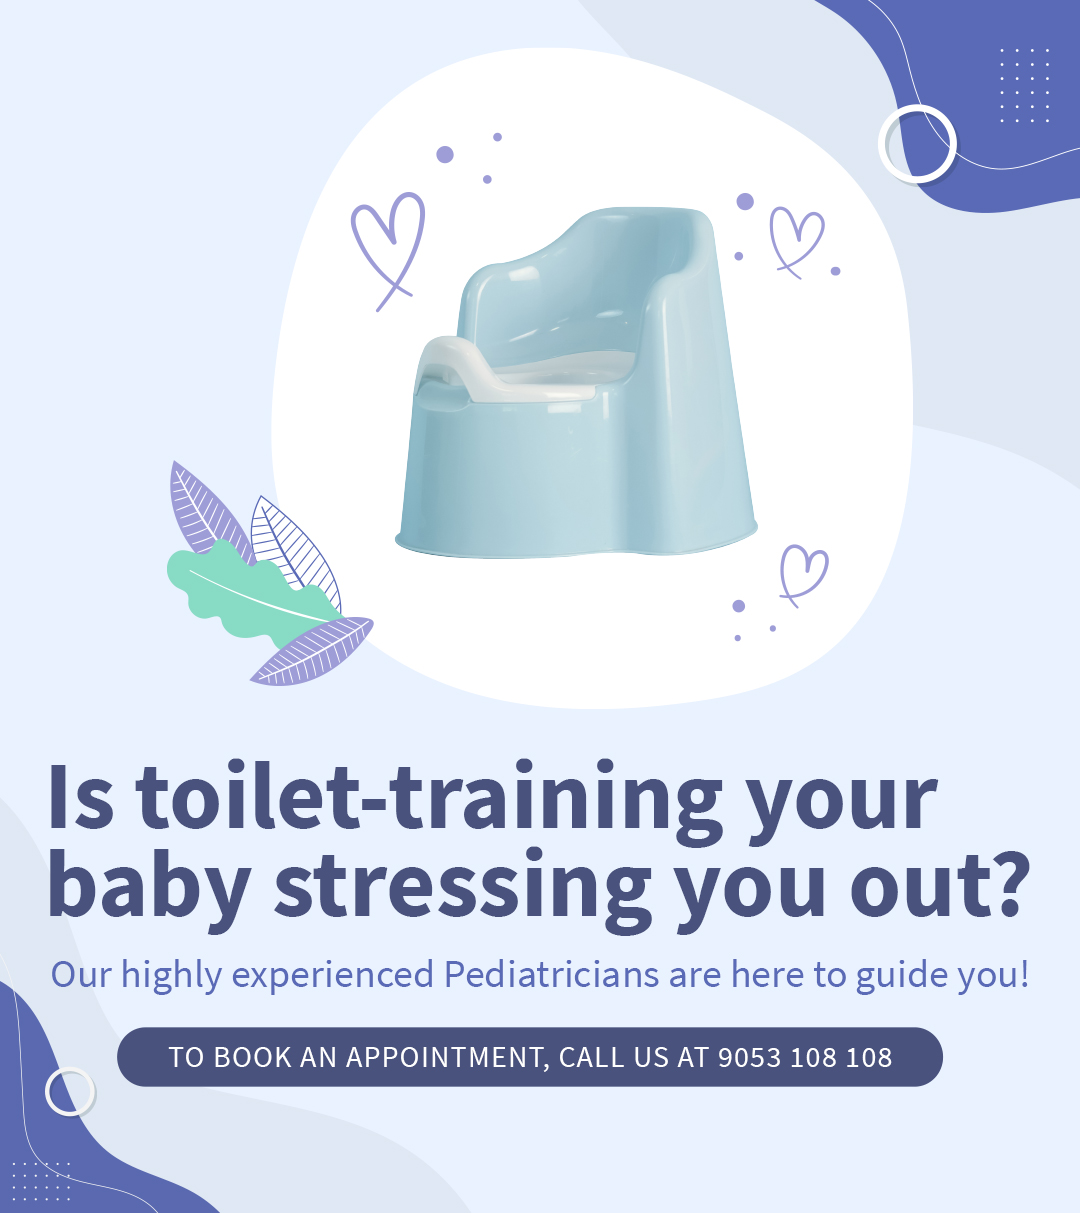 is toilet-training your baby stressing you out - mobile